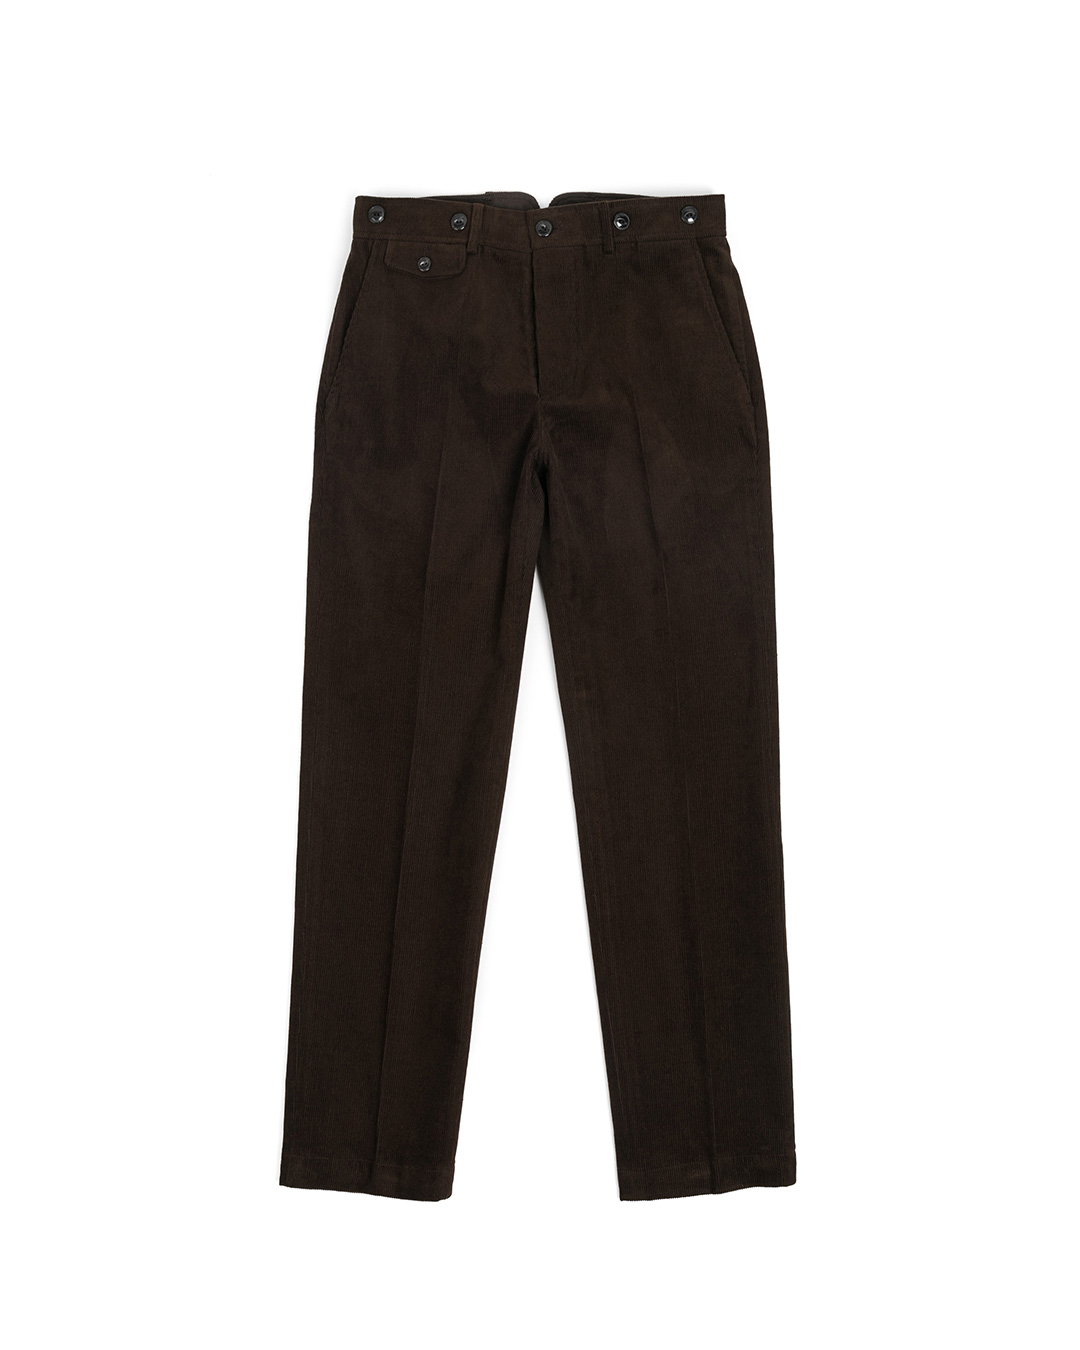 02 BUCKLE-BACK WORK TROUSERS (brown)